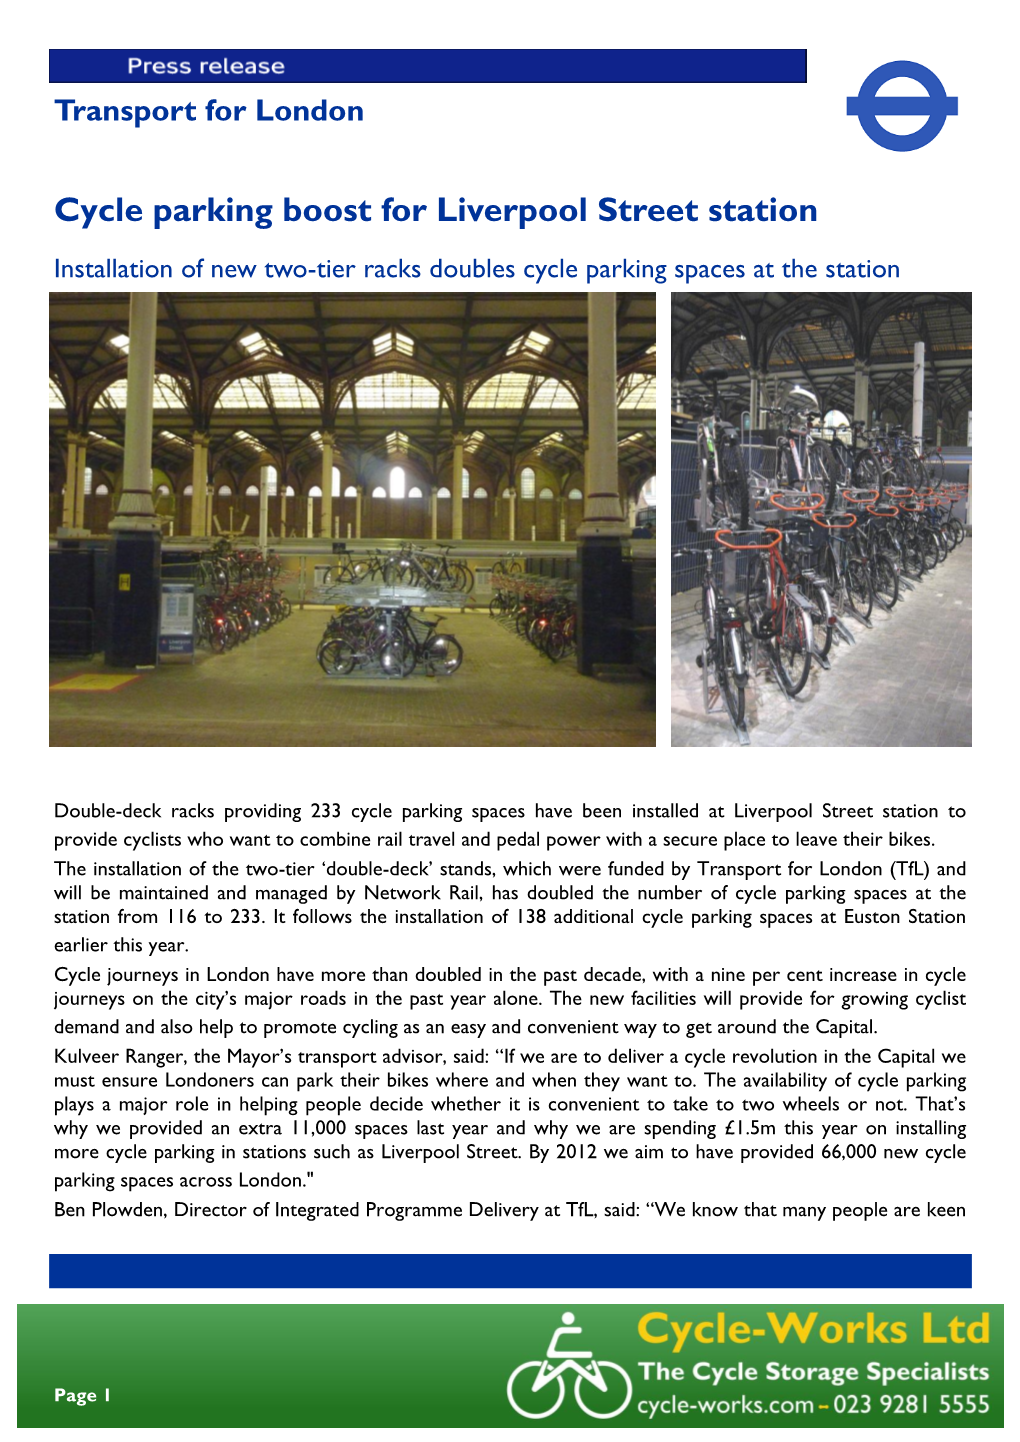 Cycle Parking Boost for Liverpool Street Station